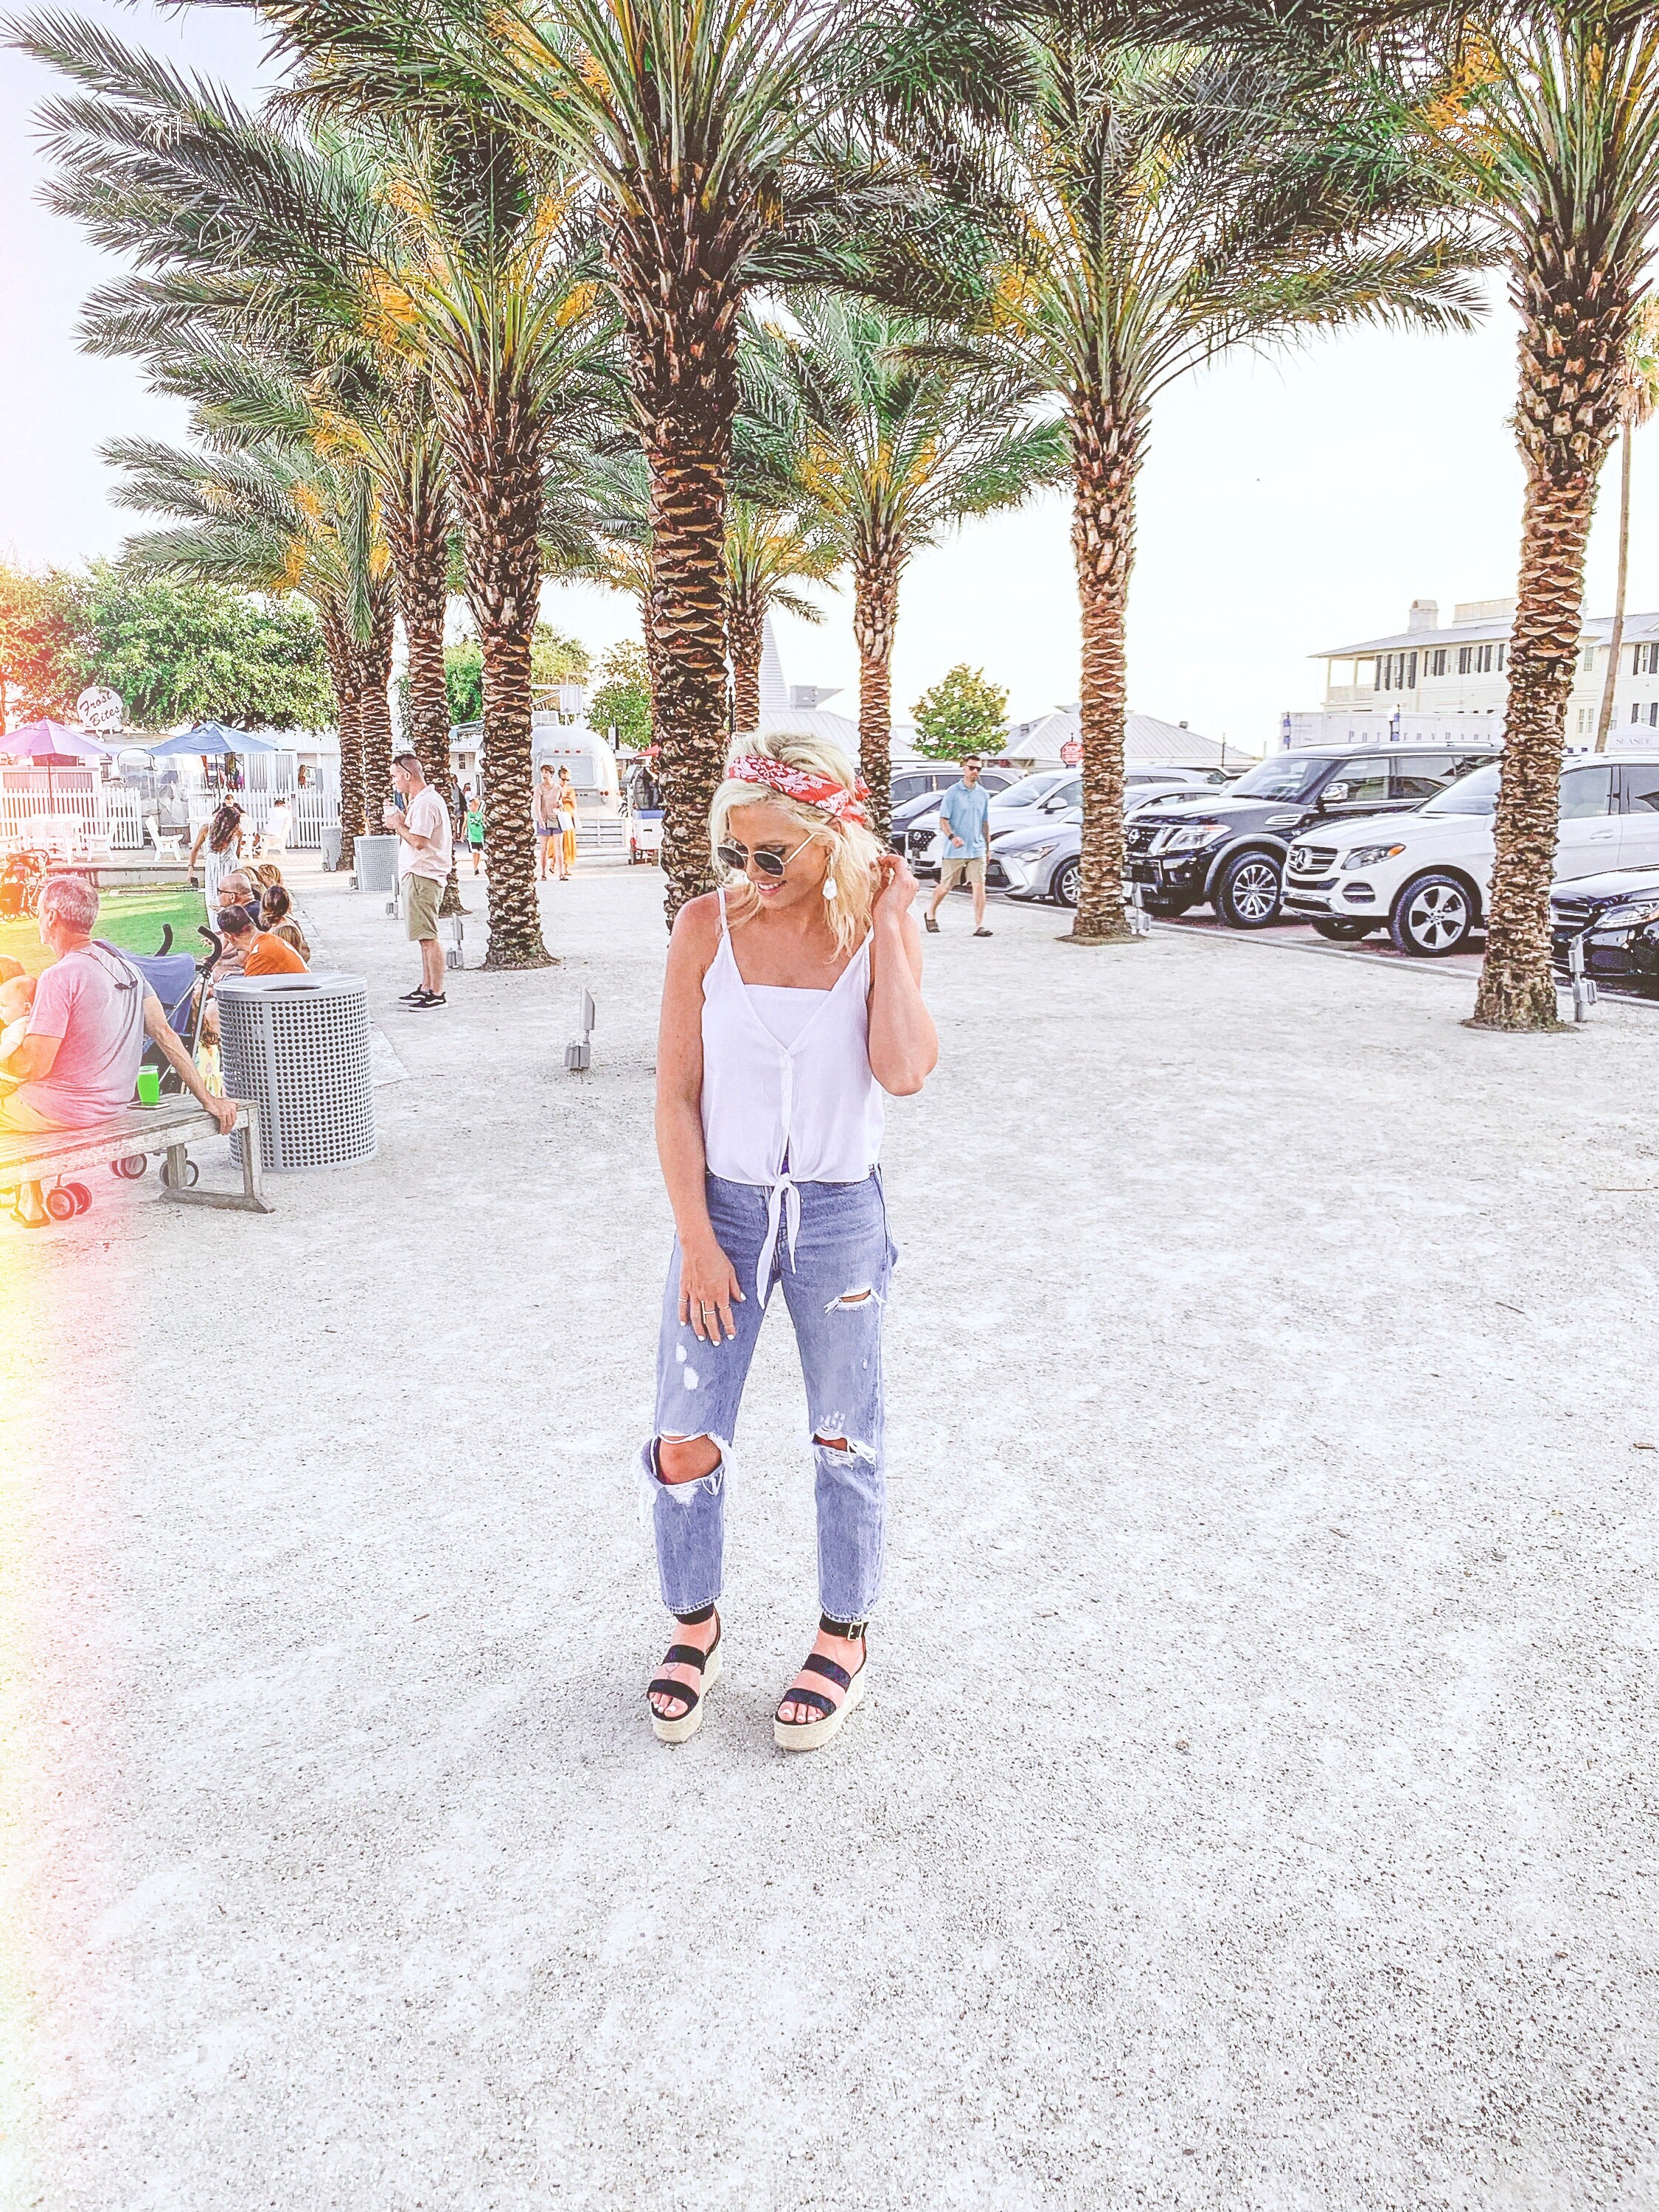 Seaside, Florida vacation outfit ideas at Eccentrics Boutique - how to dress for a beach vacation